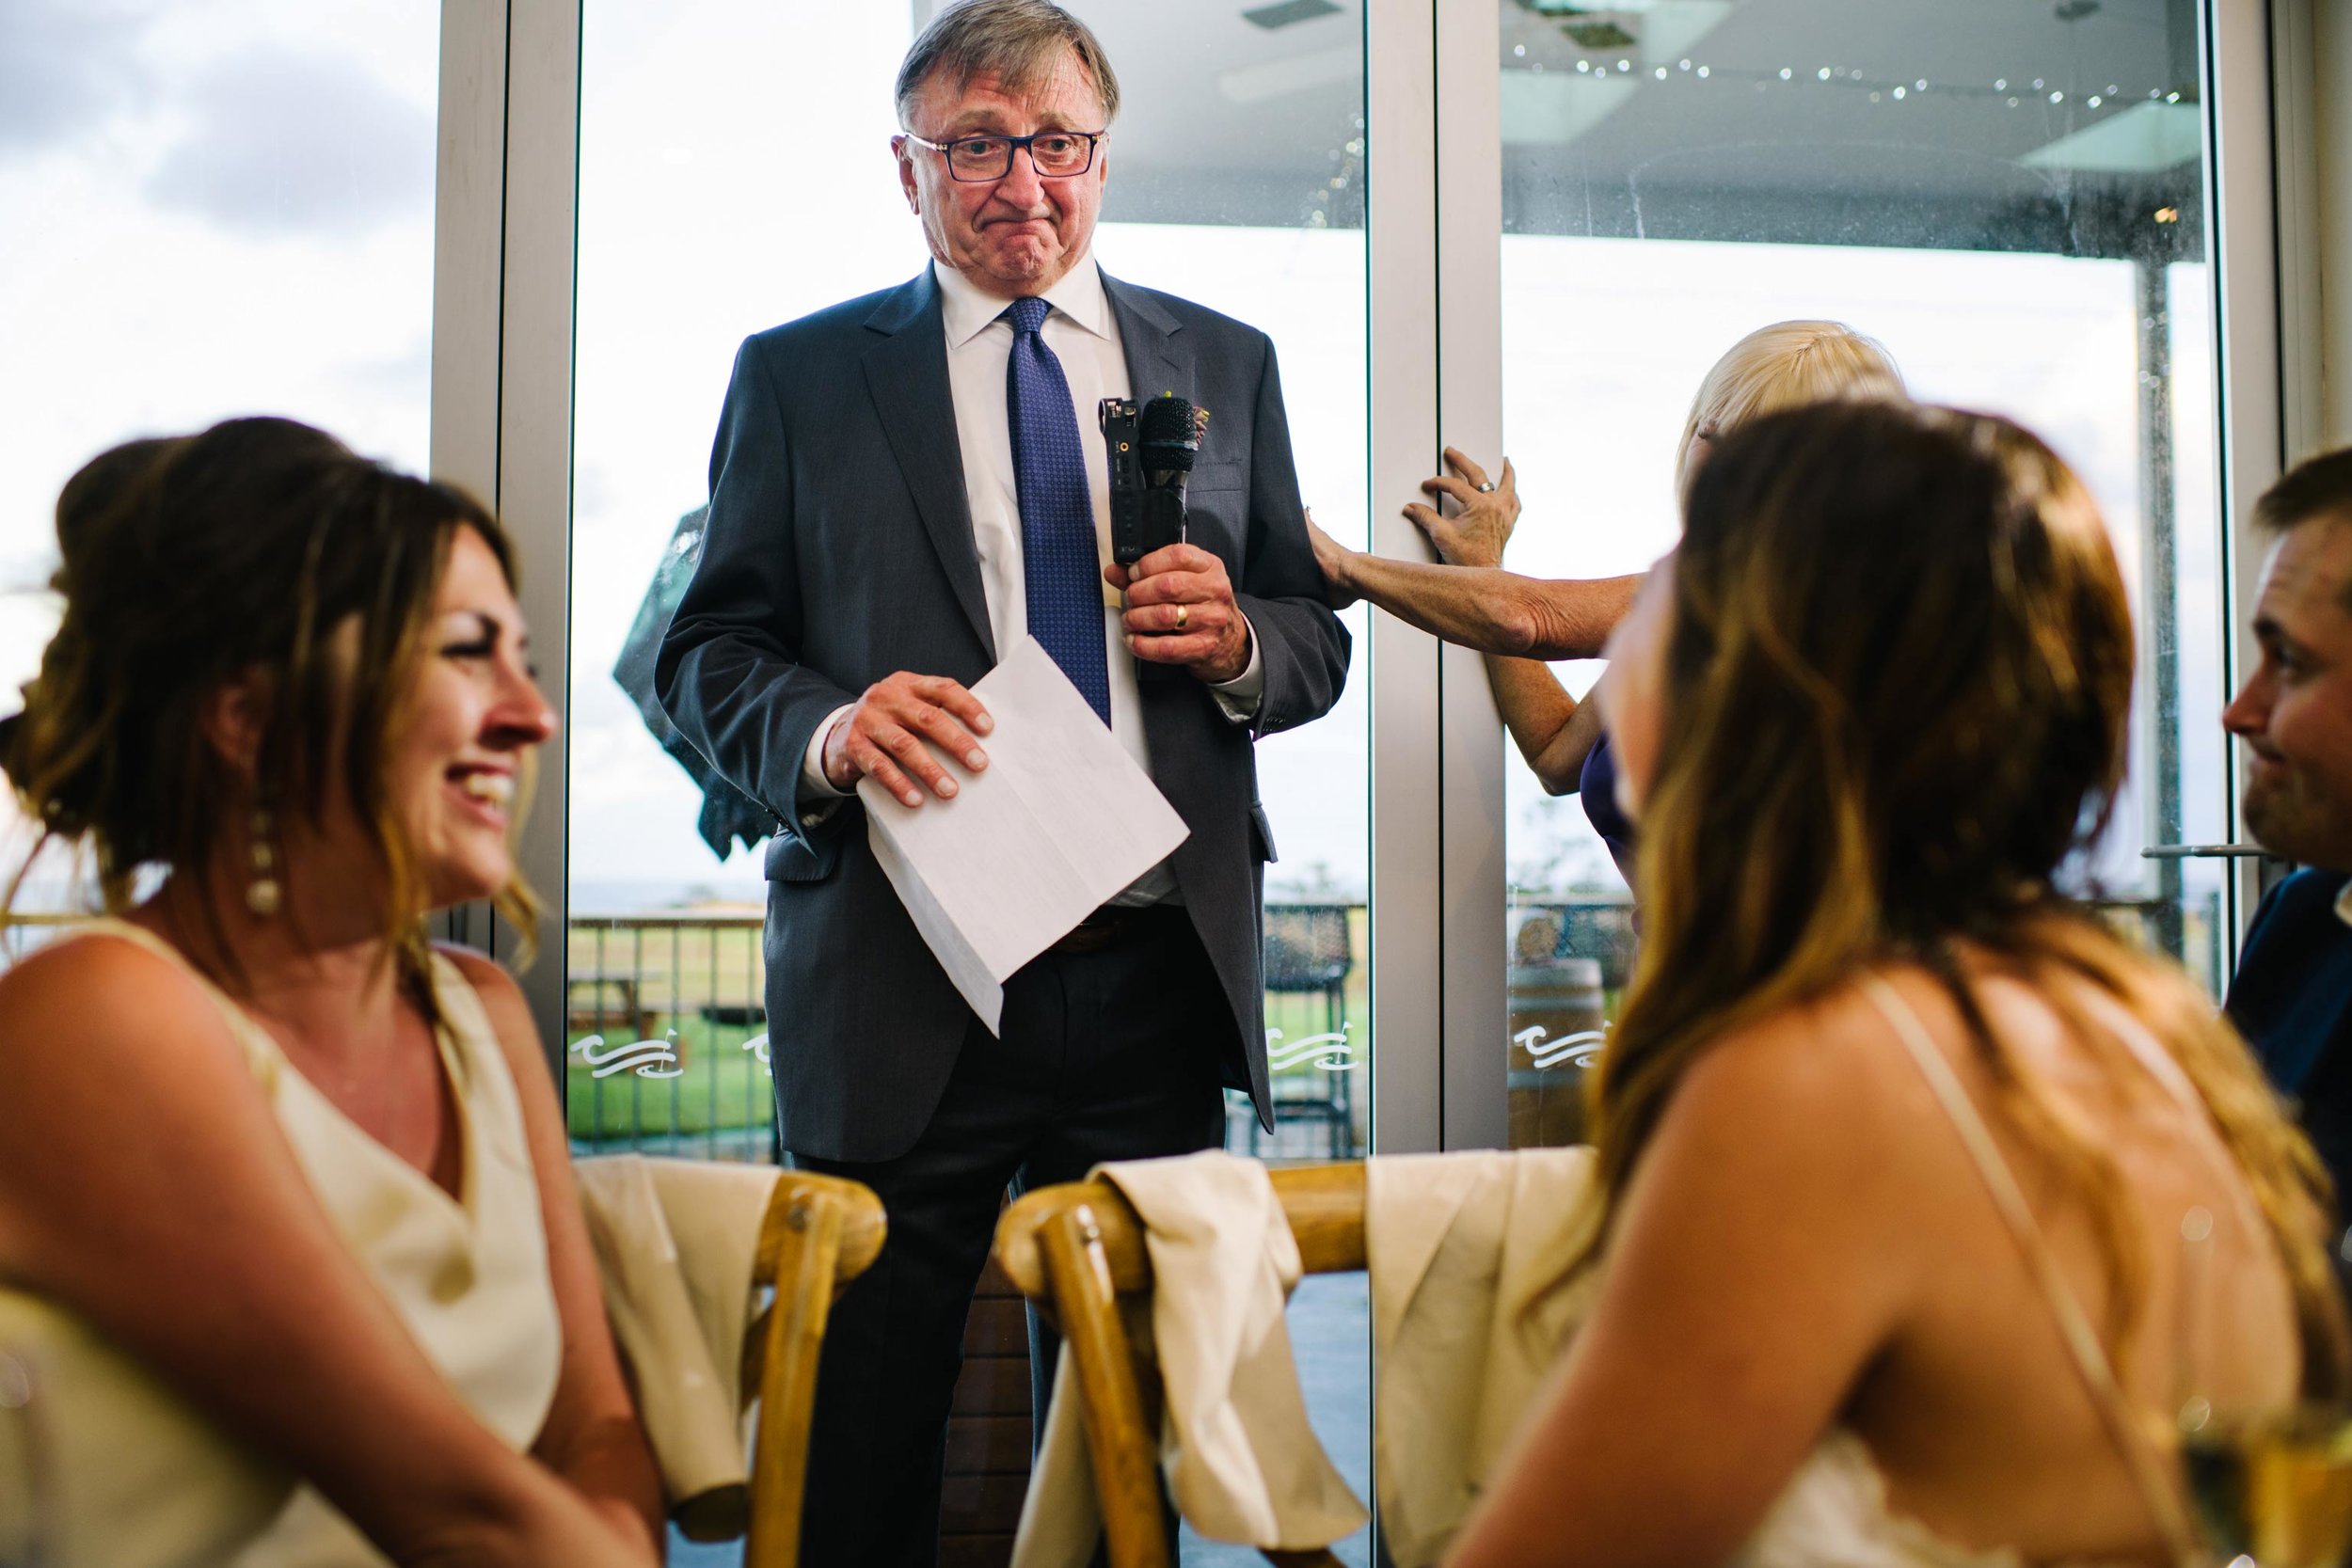 Father of the groom getting emotional during wedding speeches